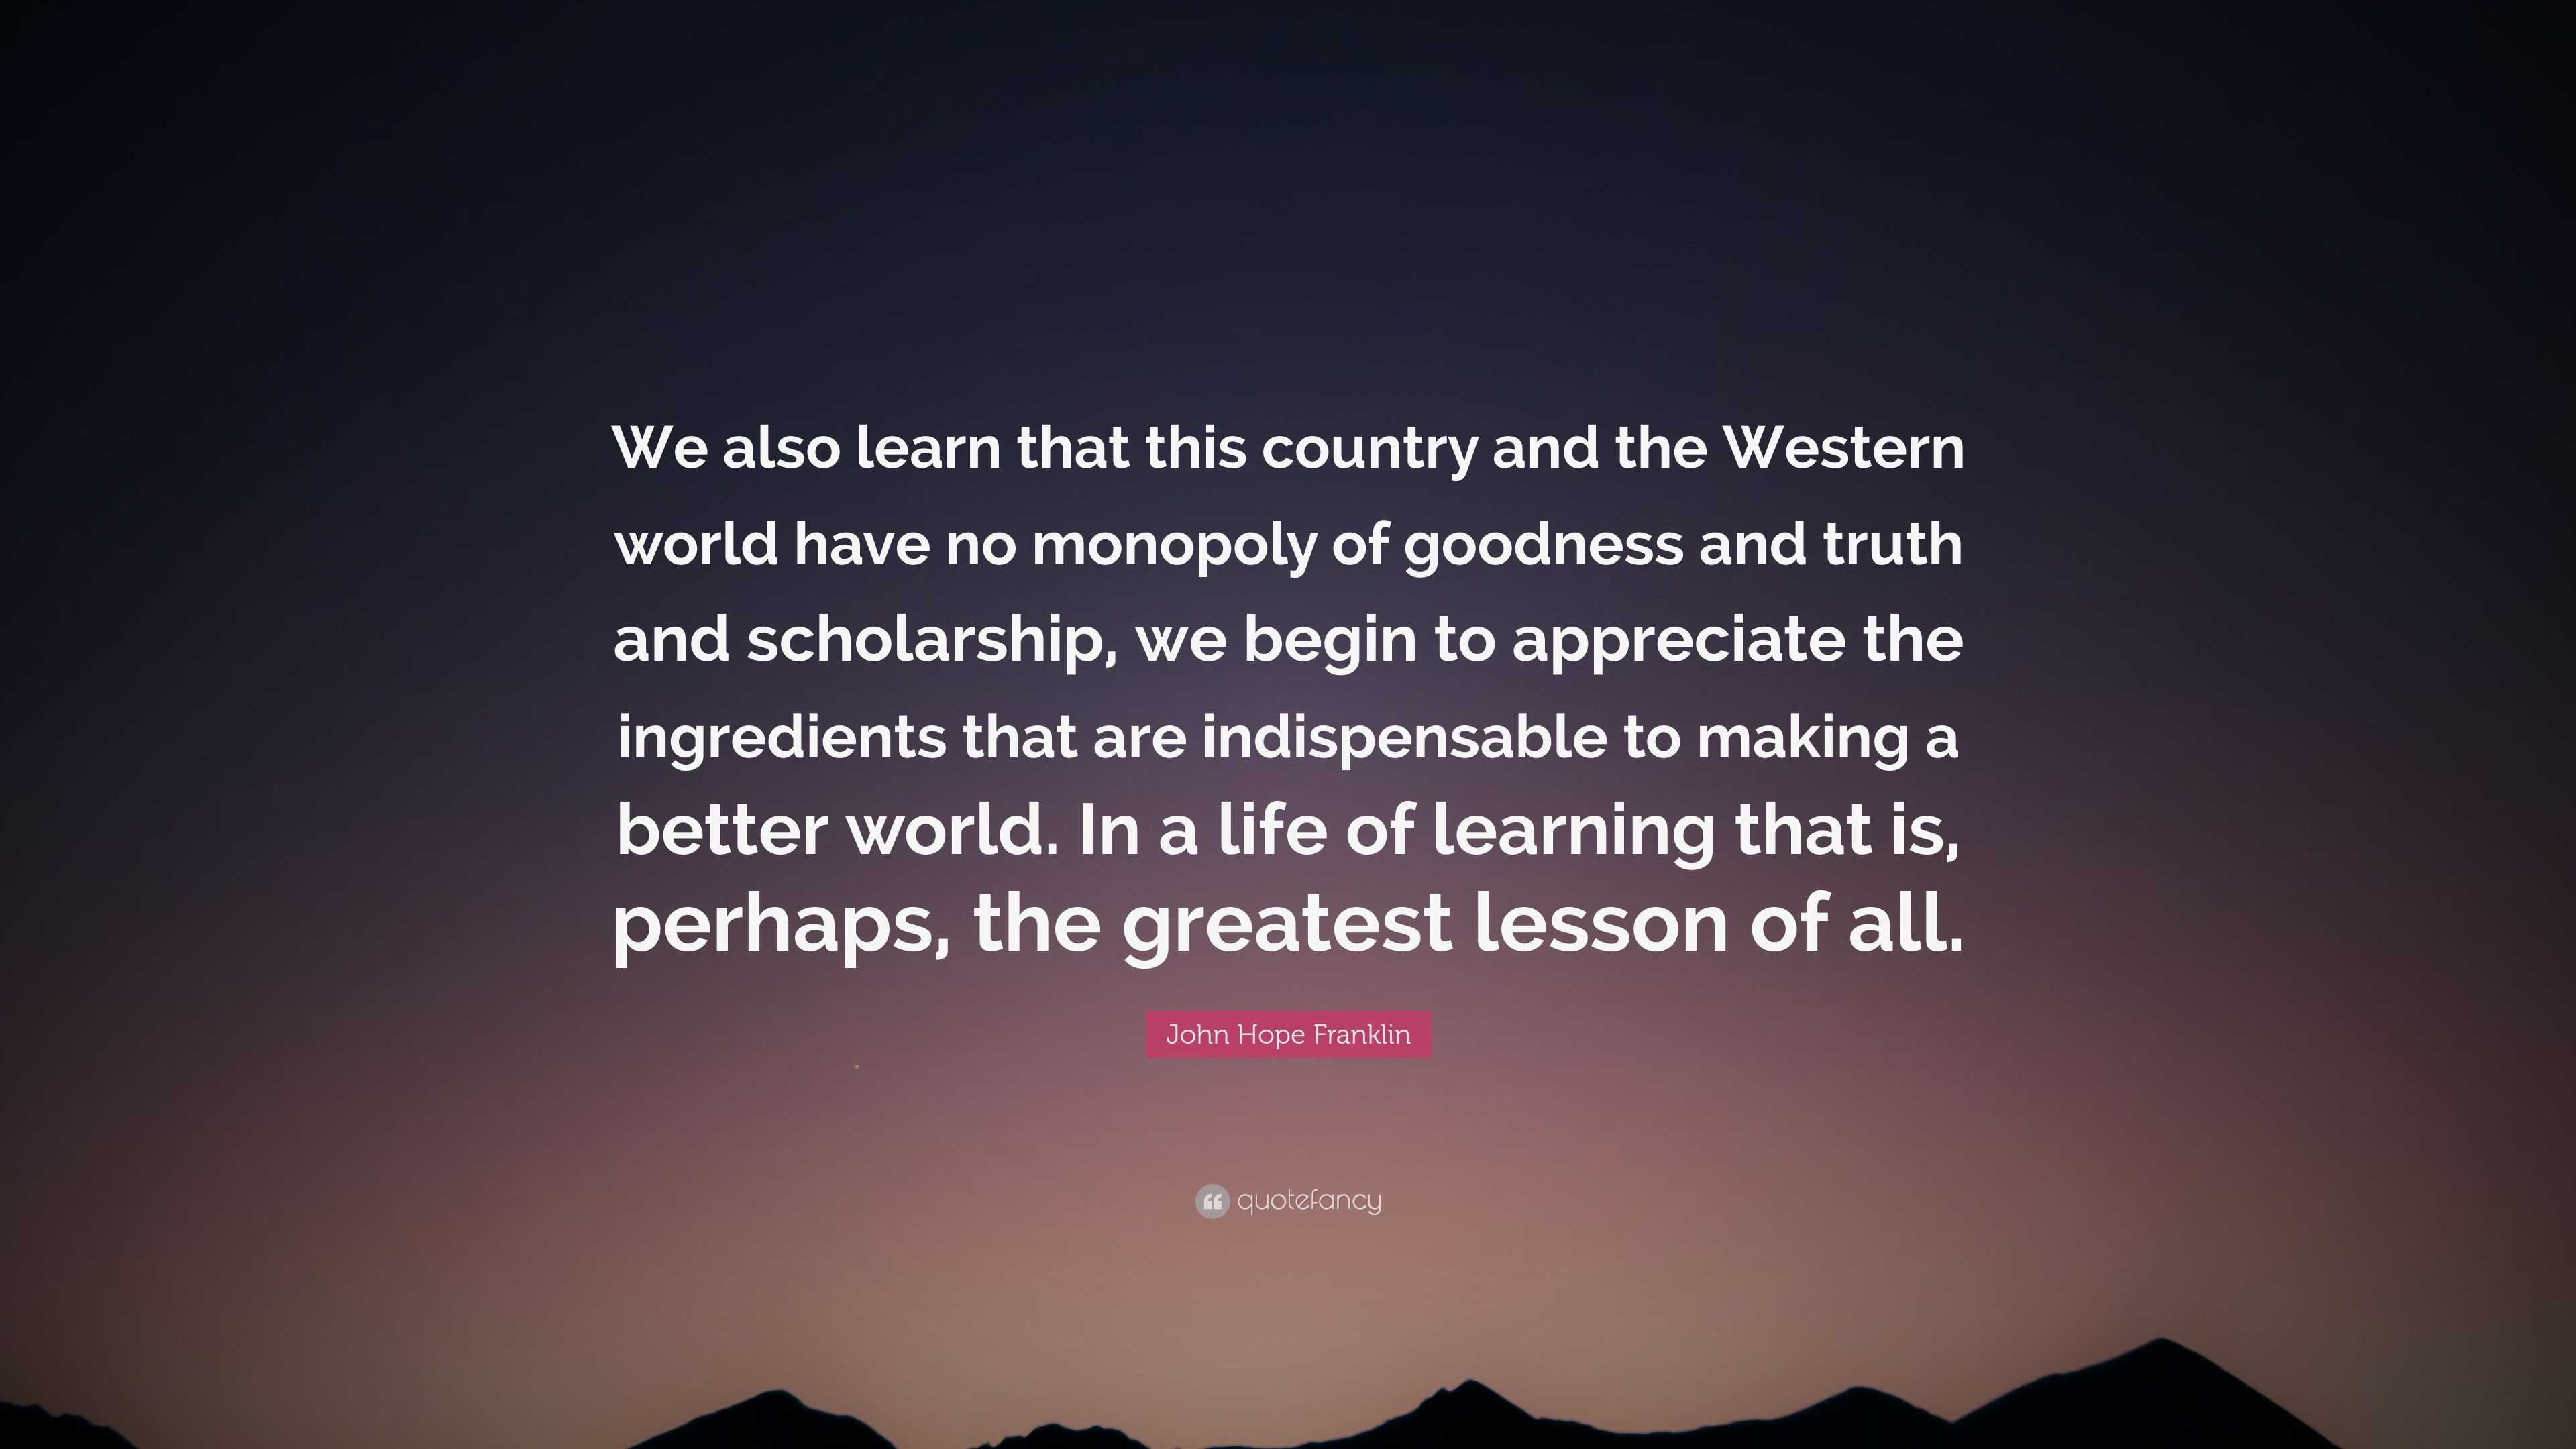 John Hope Franklin Quote: “We also learn that this country and the ...